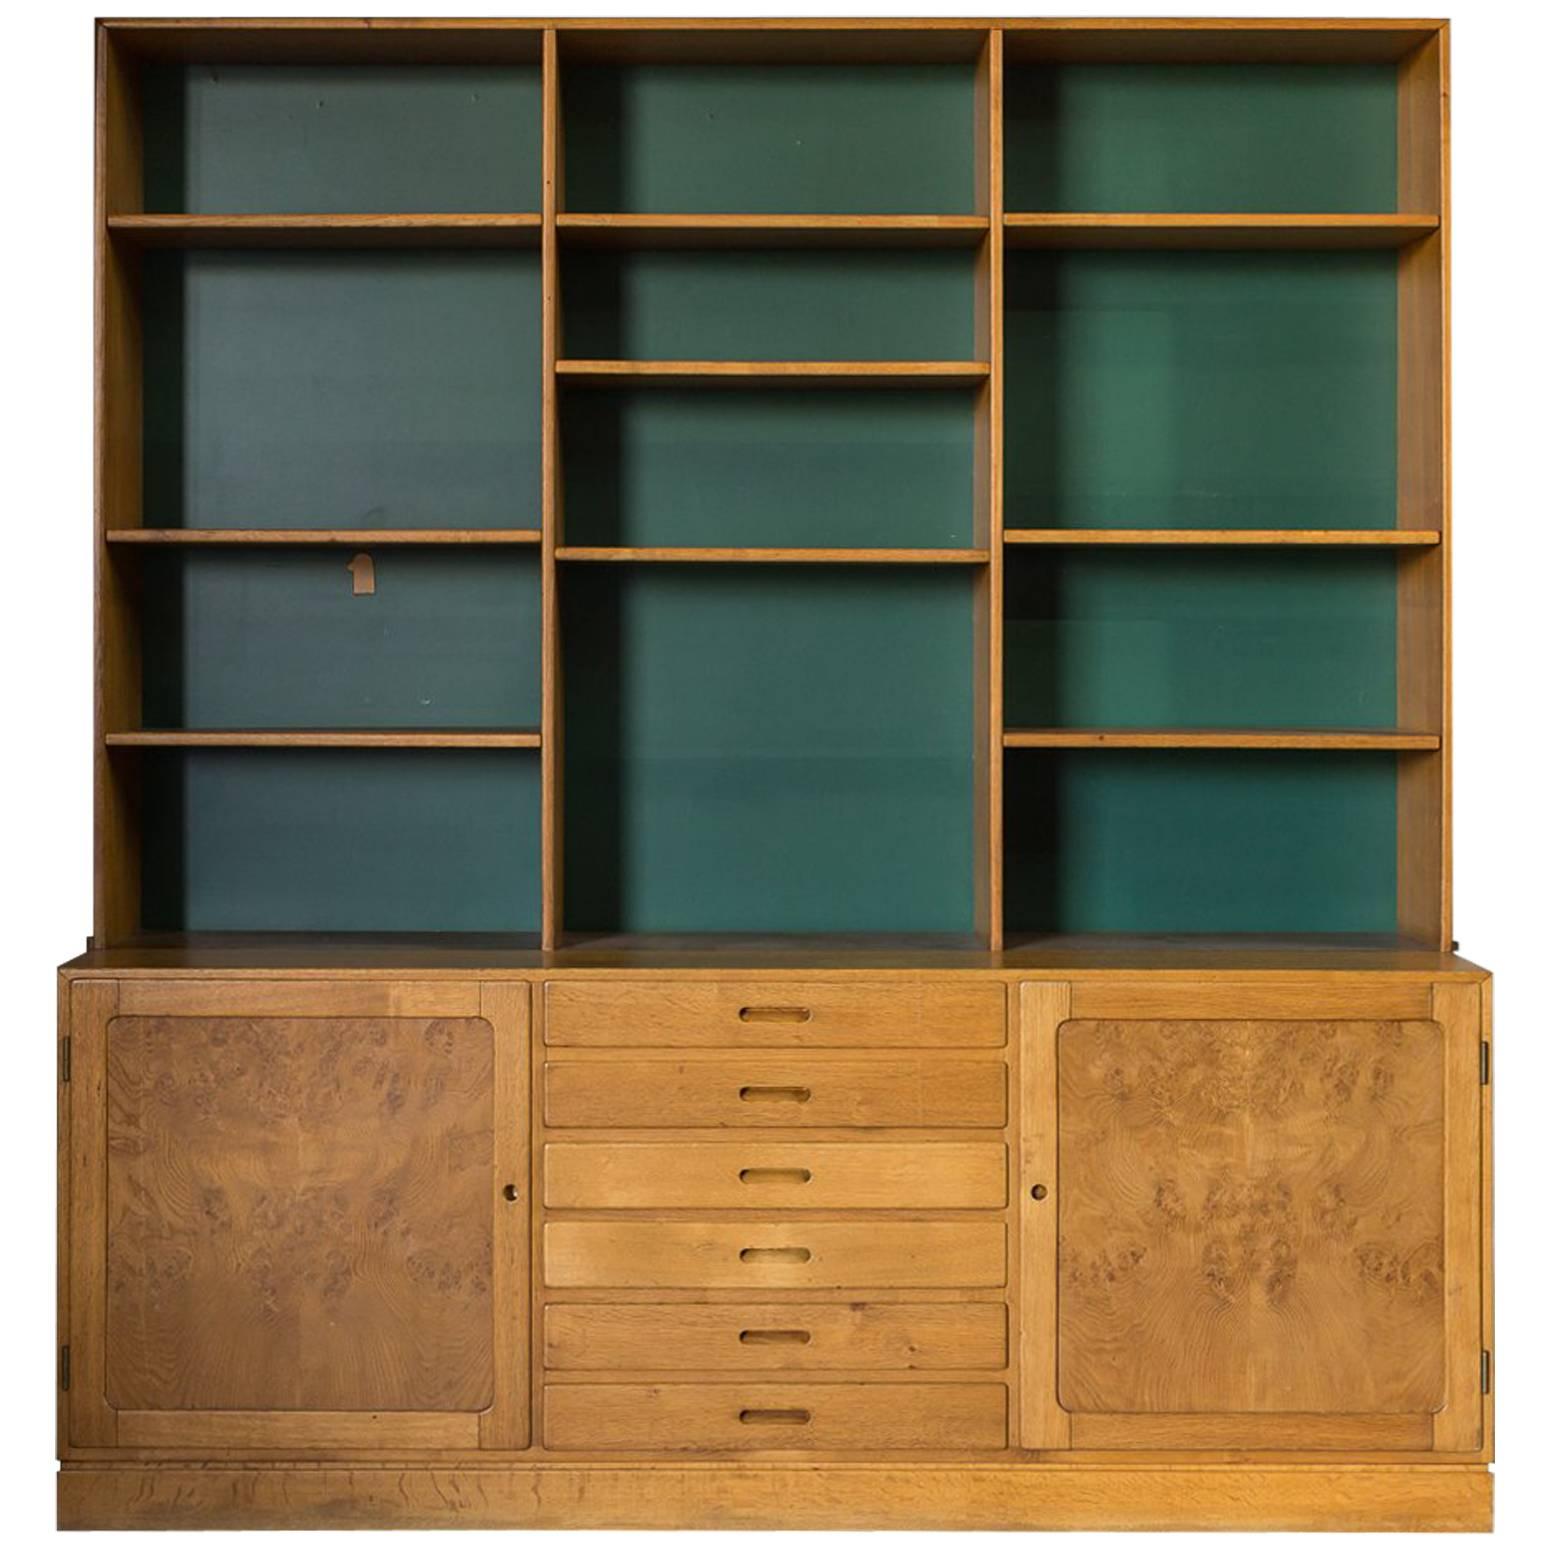 Two-Piece Midcentury Oak Cabinet with Green Painted Back Wall